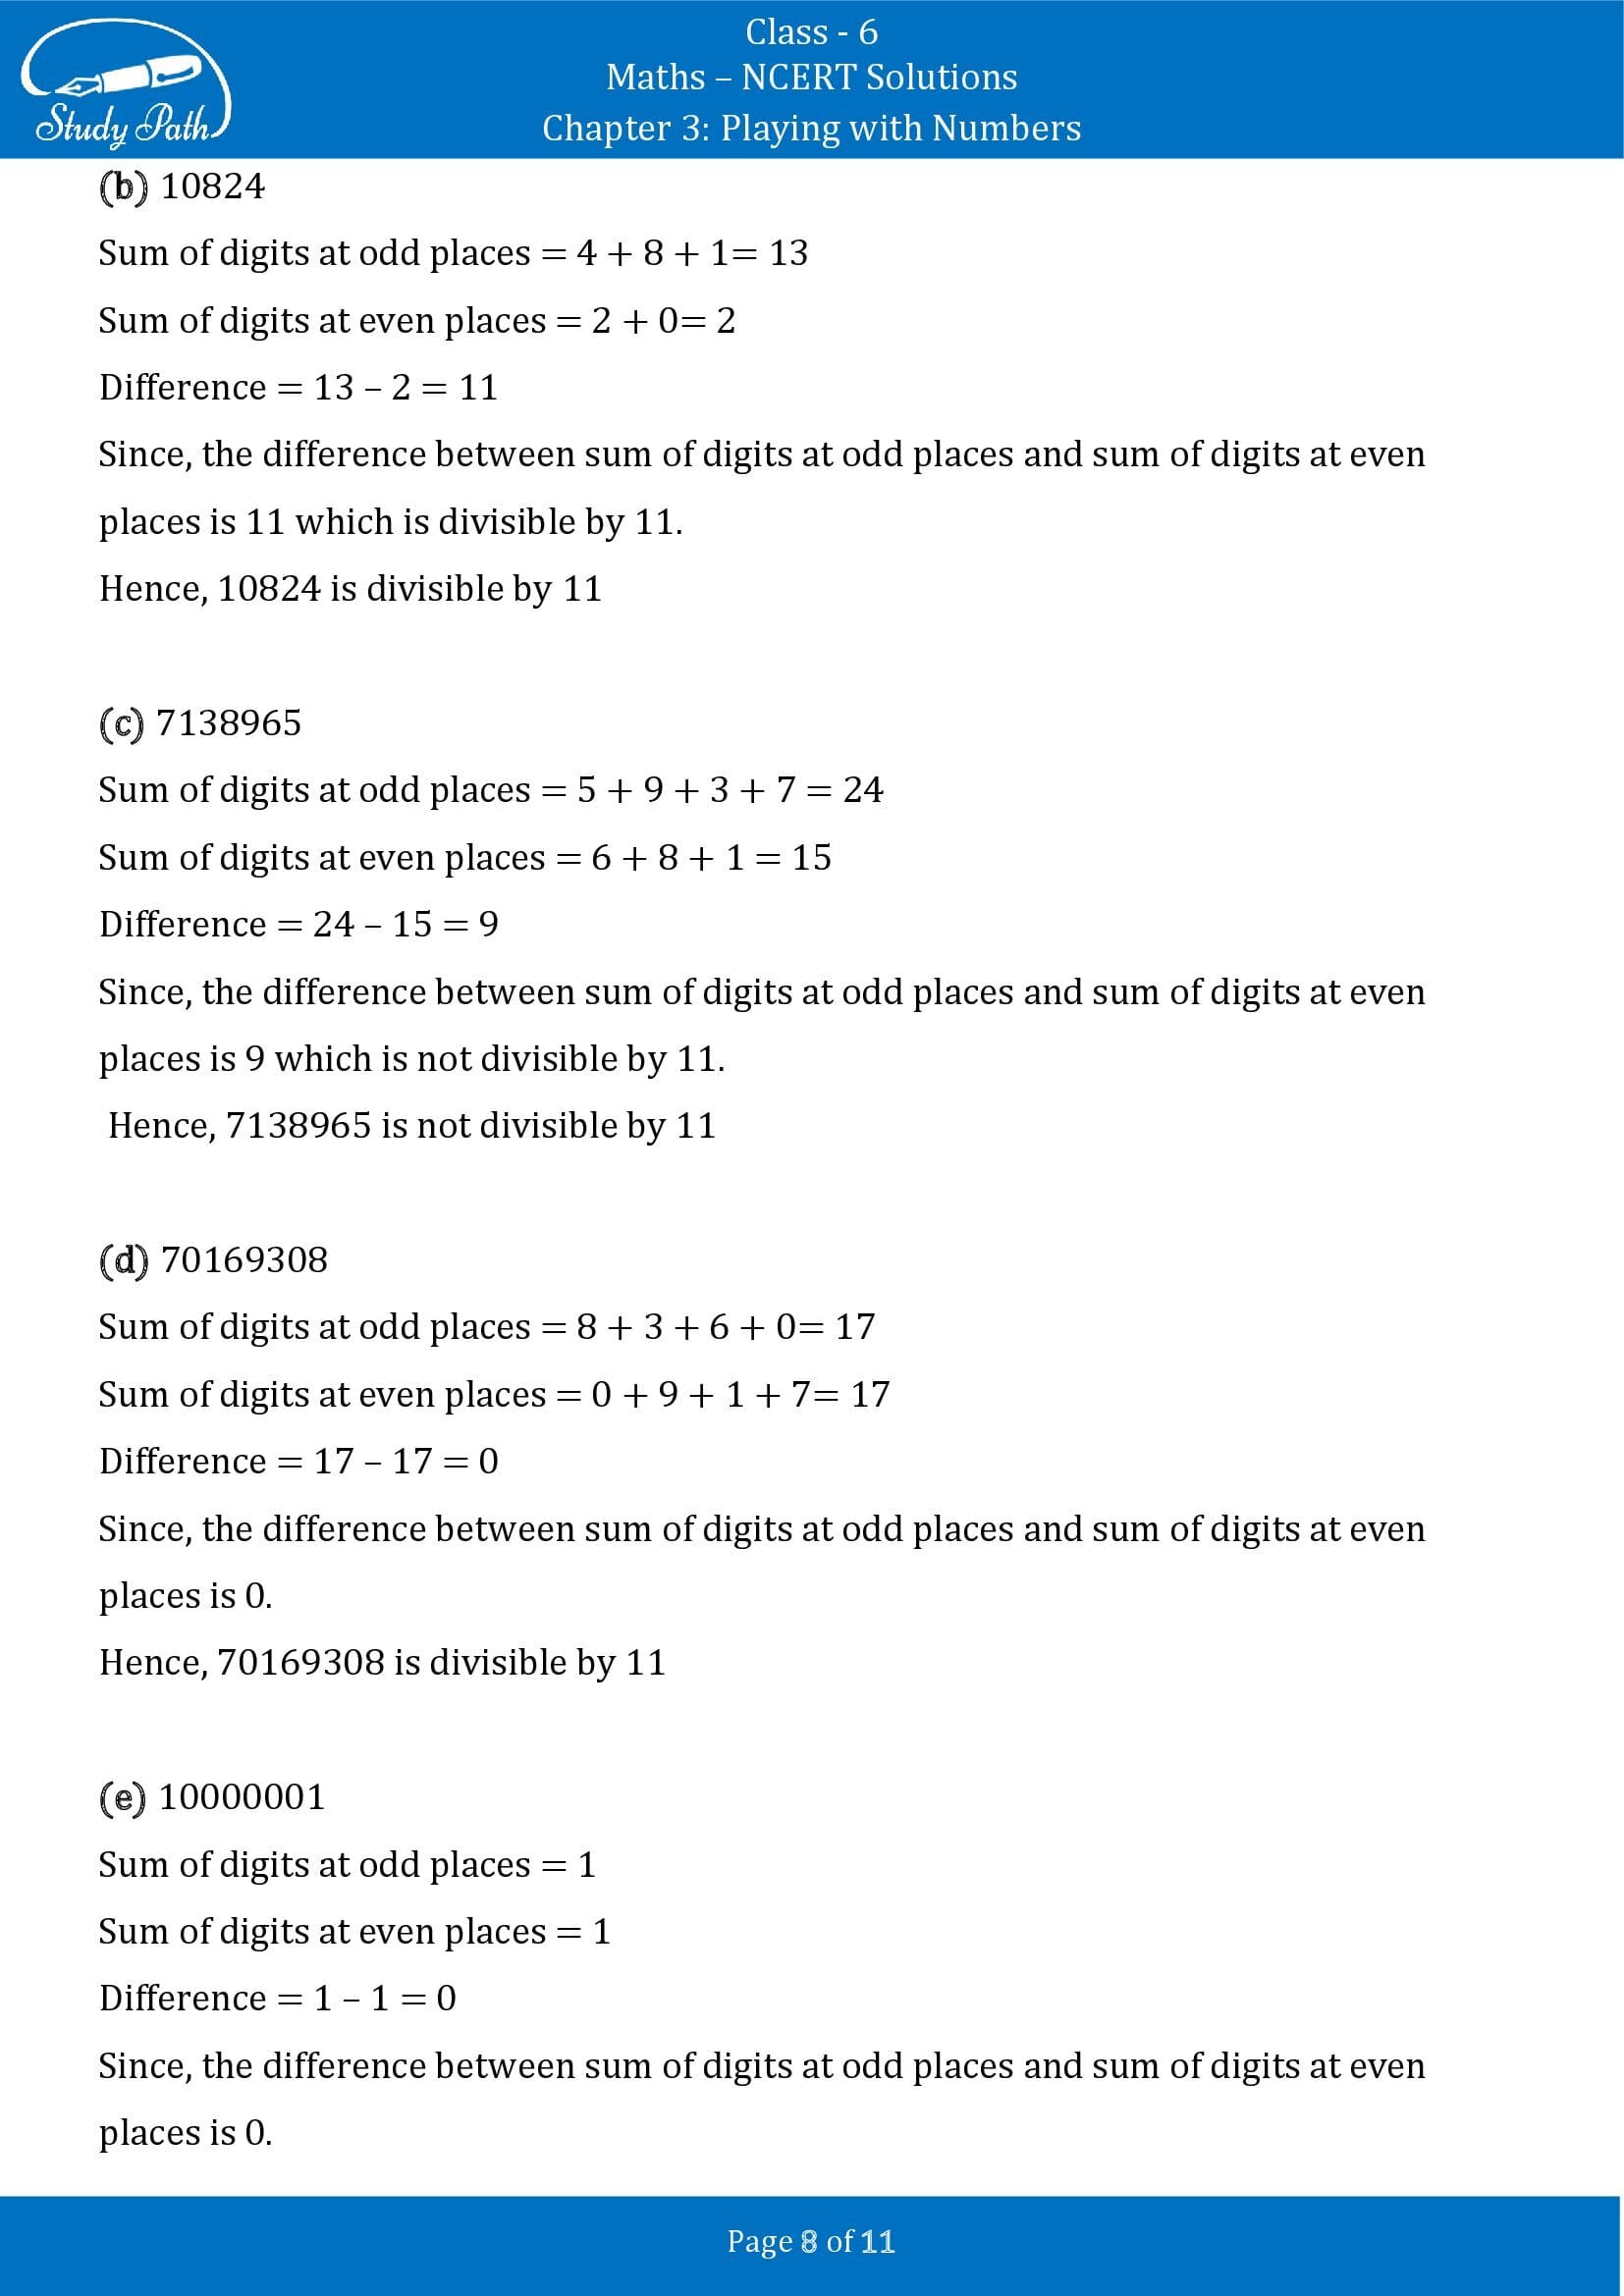 NCERT Solutions for Class 6 Maths Chapter 3 Playing with Numbers Exercise 3.3 00008